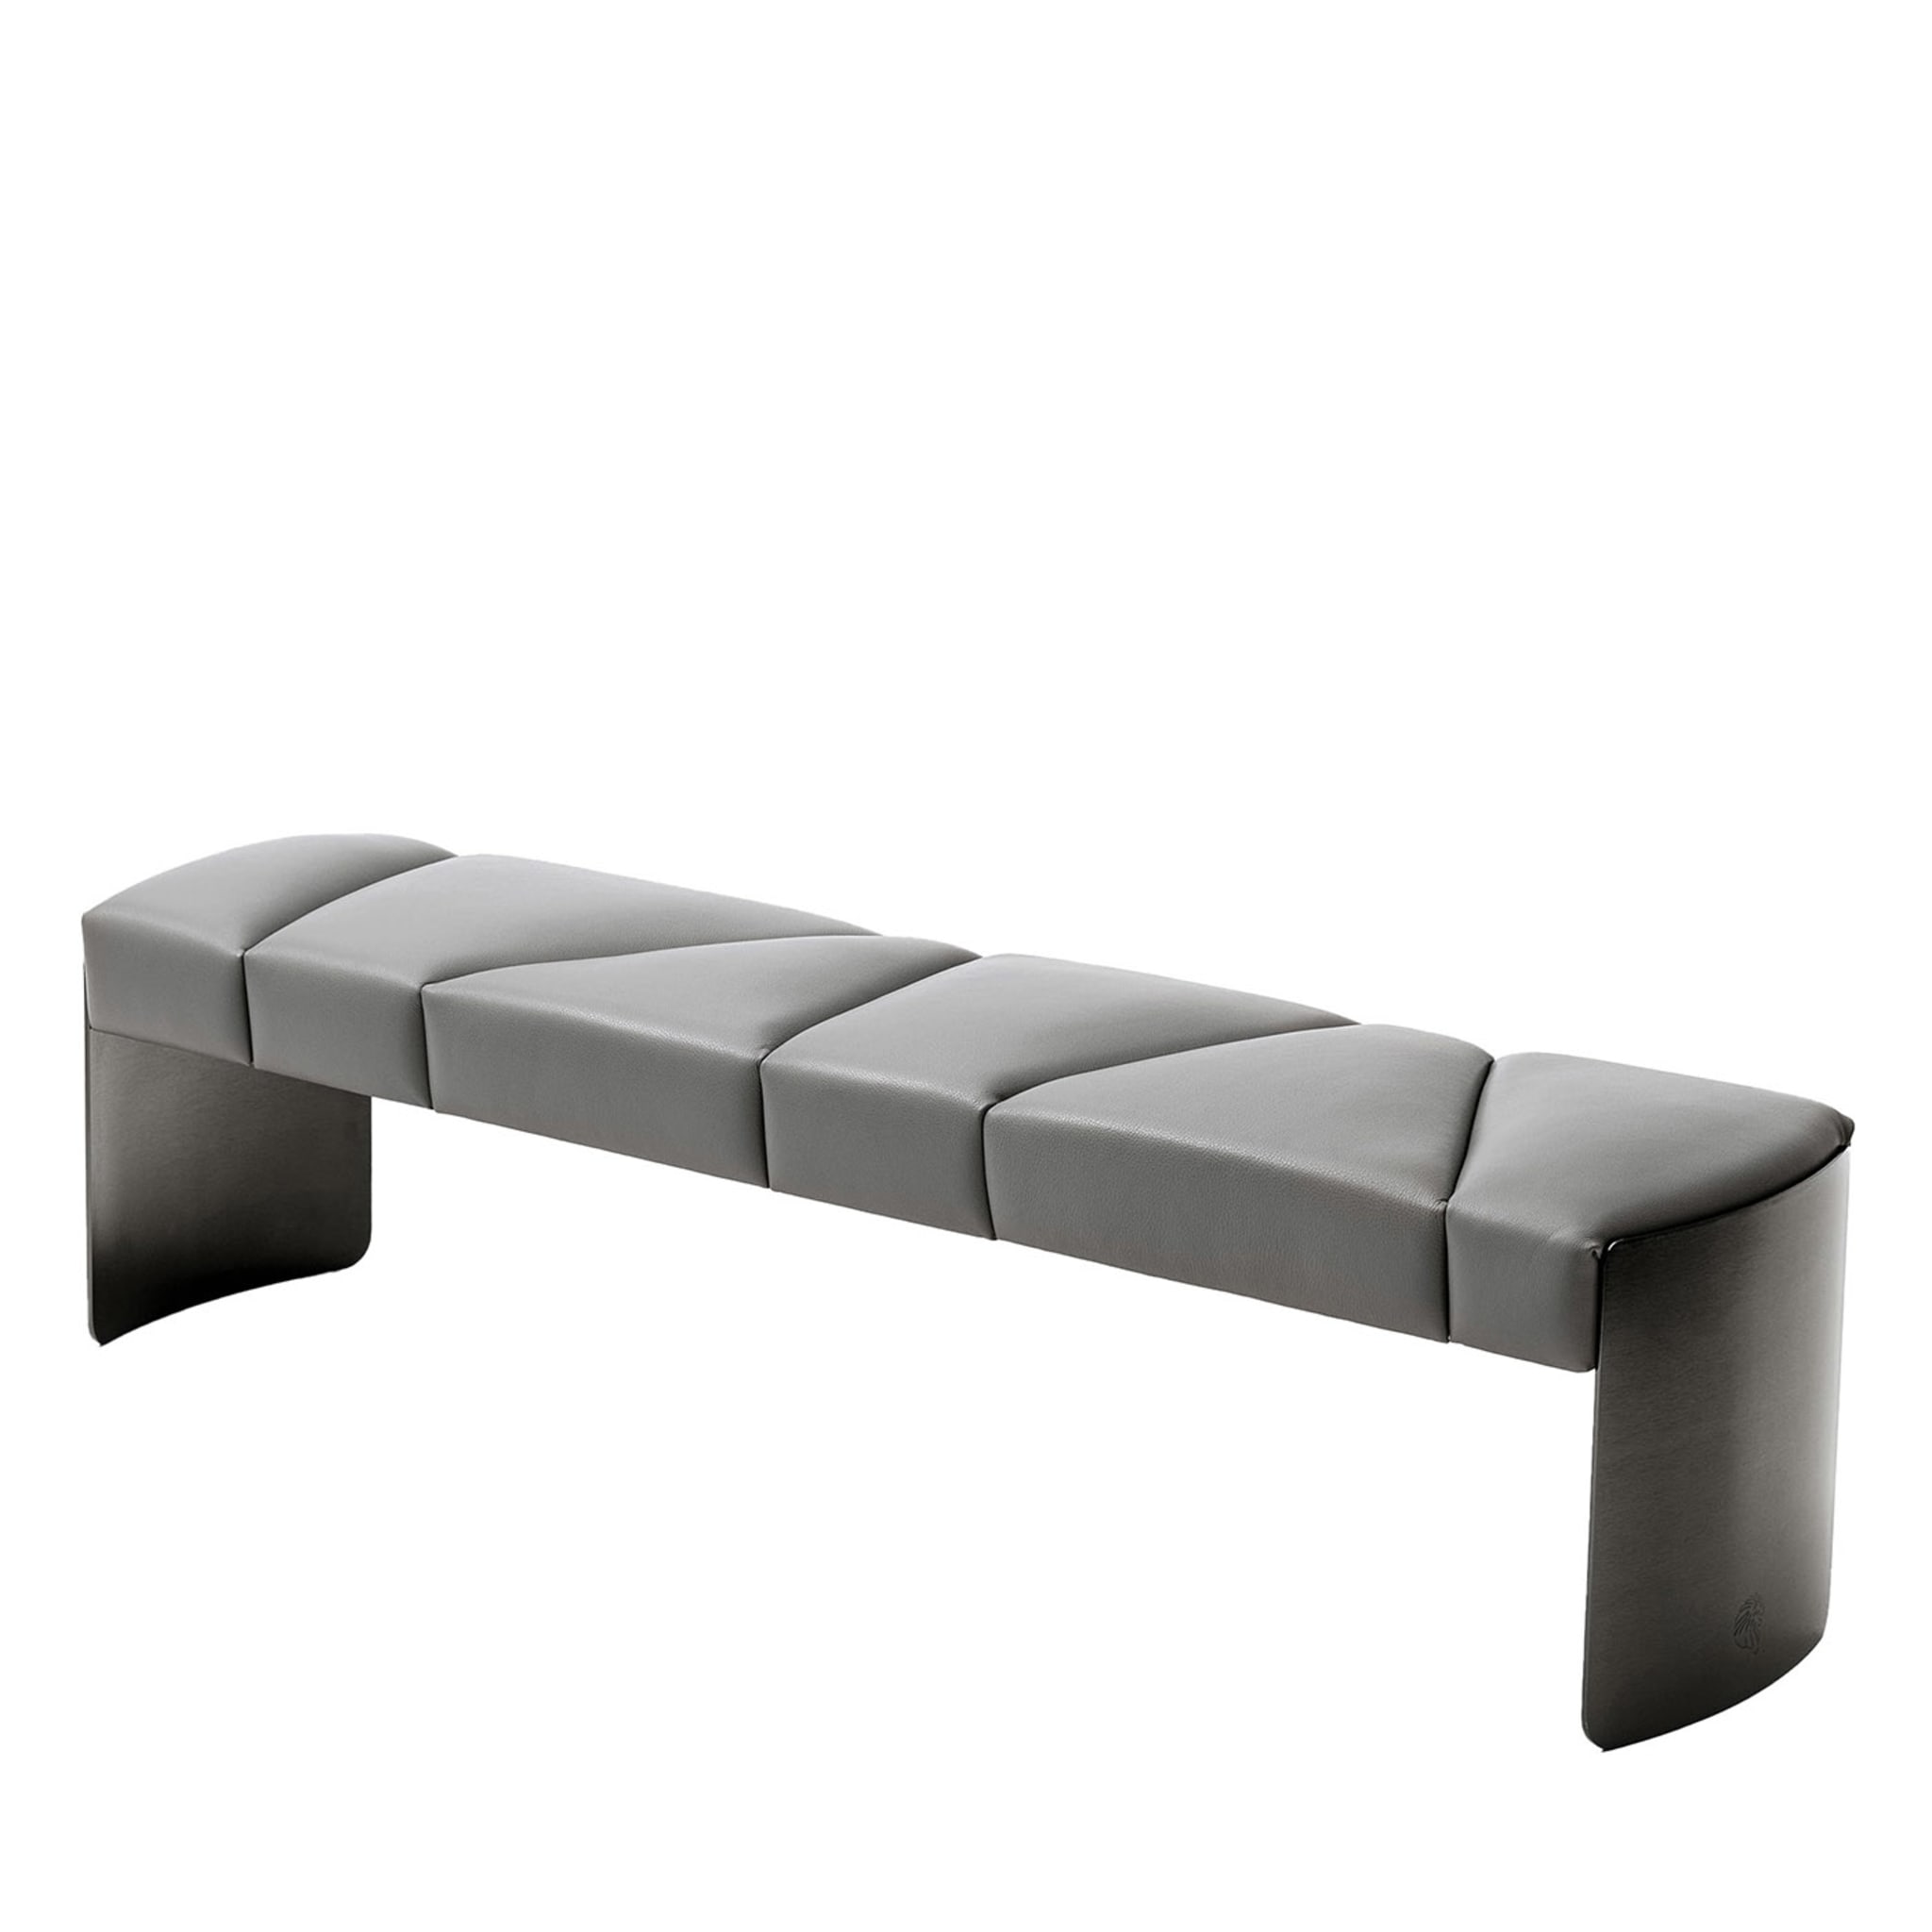 Mirage Gray Leather Bench - Main view